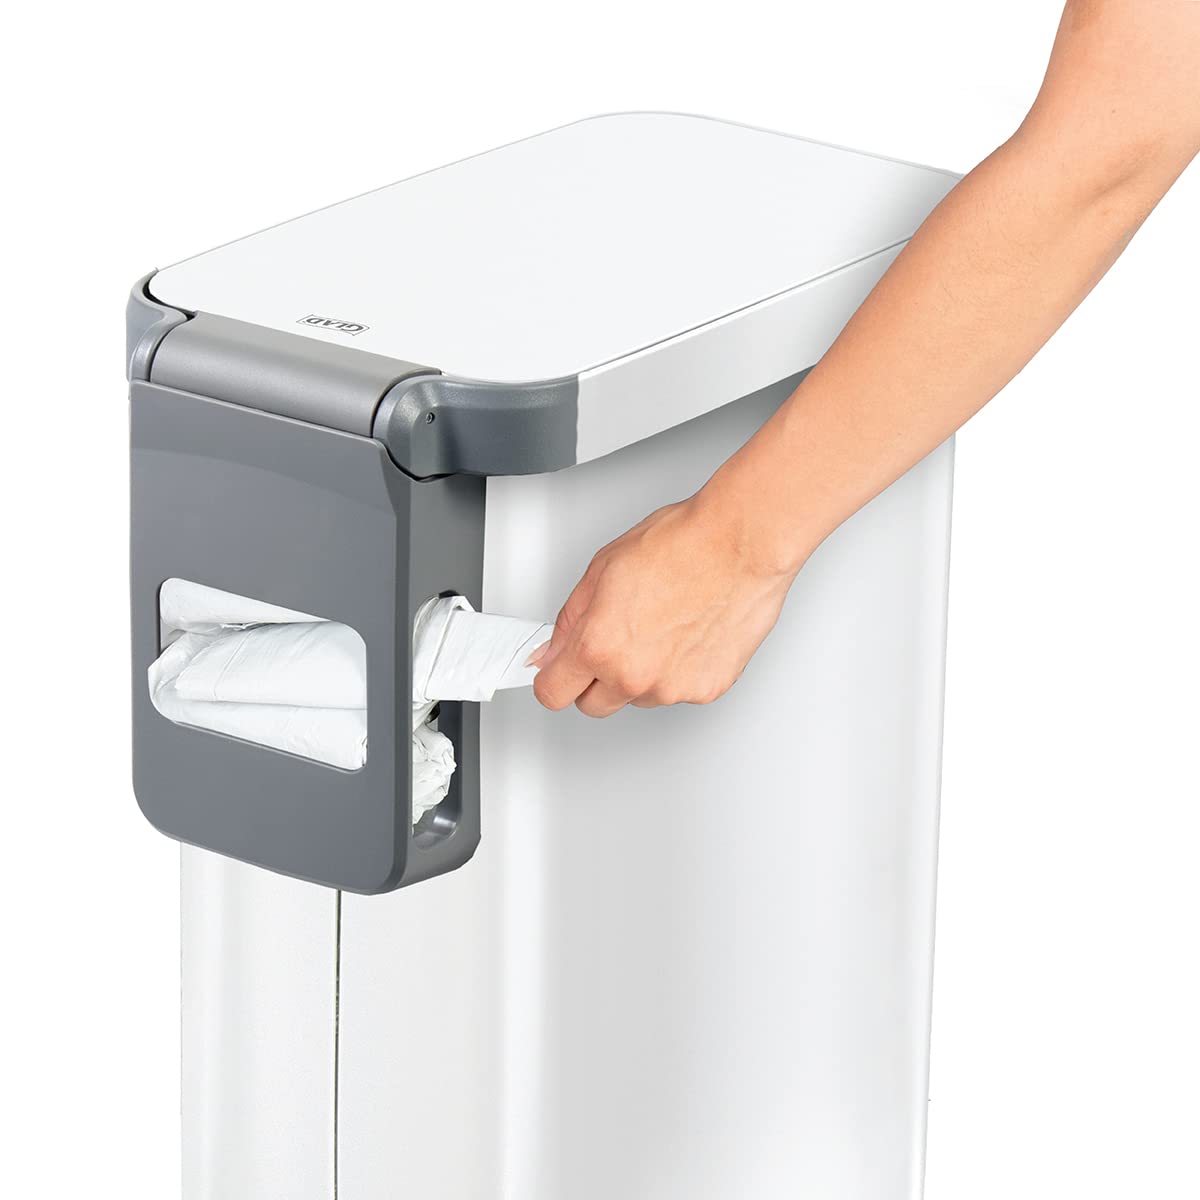 https://bigbigmart.com/wp-content/uploads/2023/10/Glad-Slim-Trash-Can-with-Clorox-Odor-Protection-Narrow-Kitchen-Garbage-Bin-with-Soft-Close-Lid-Step-On-Foot-Pedal-and-Waste-Bag-Roll-Holder-White-Stainless-Steel-45-Liter5.jpg